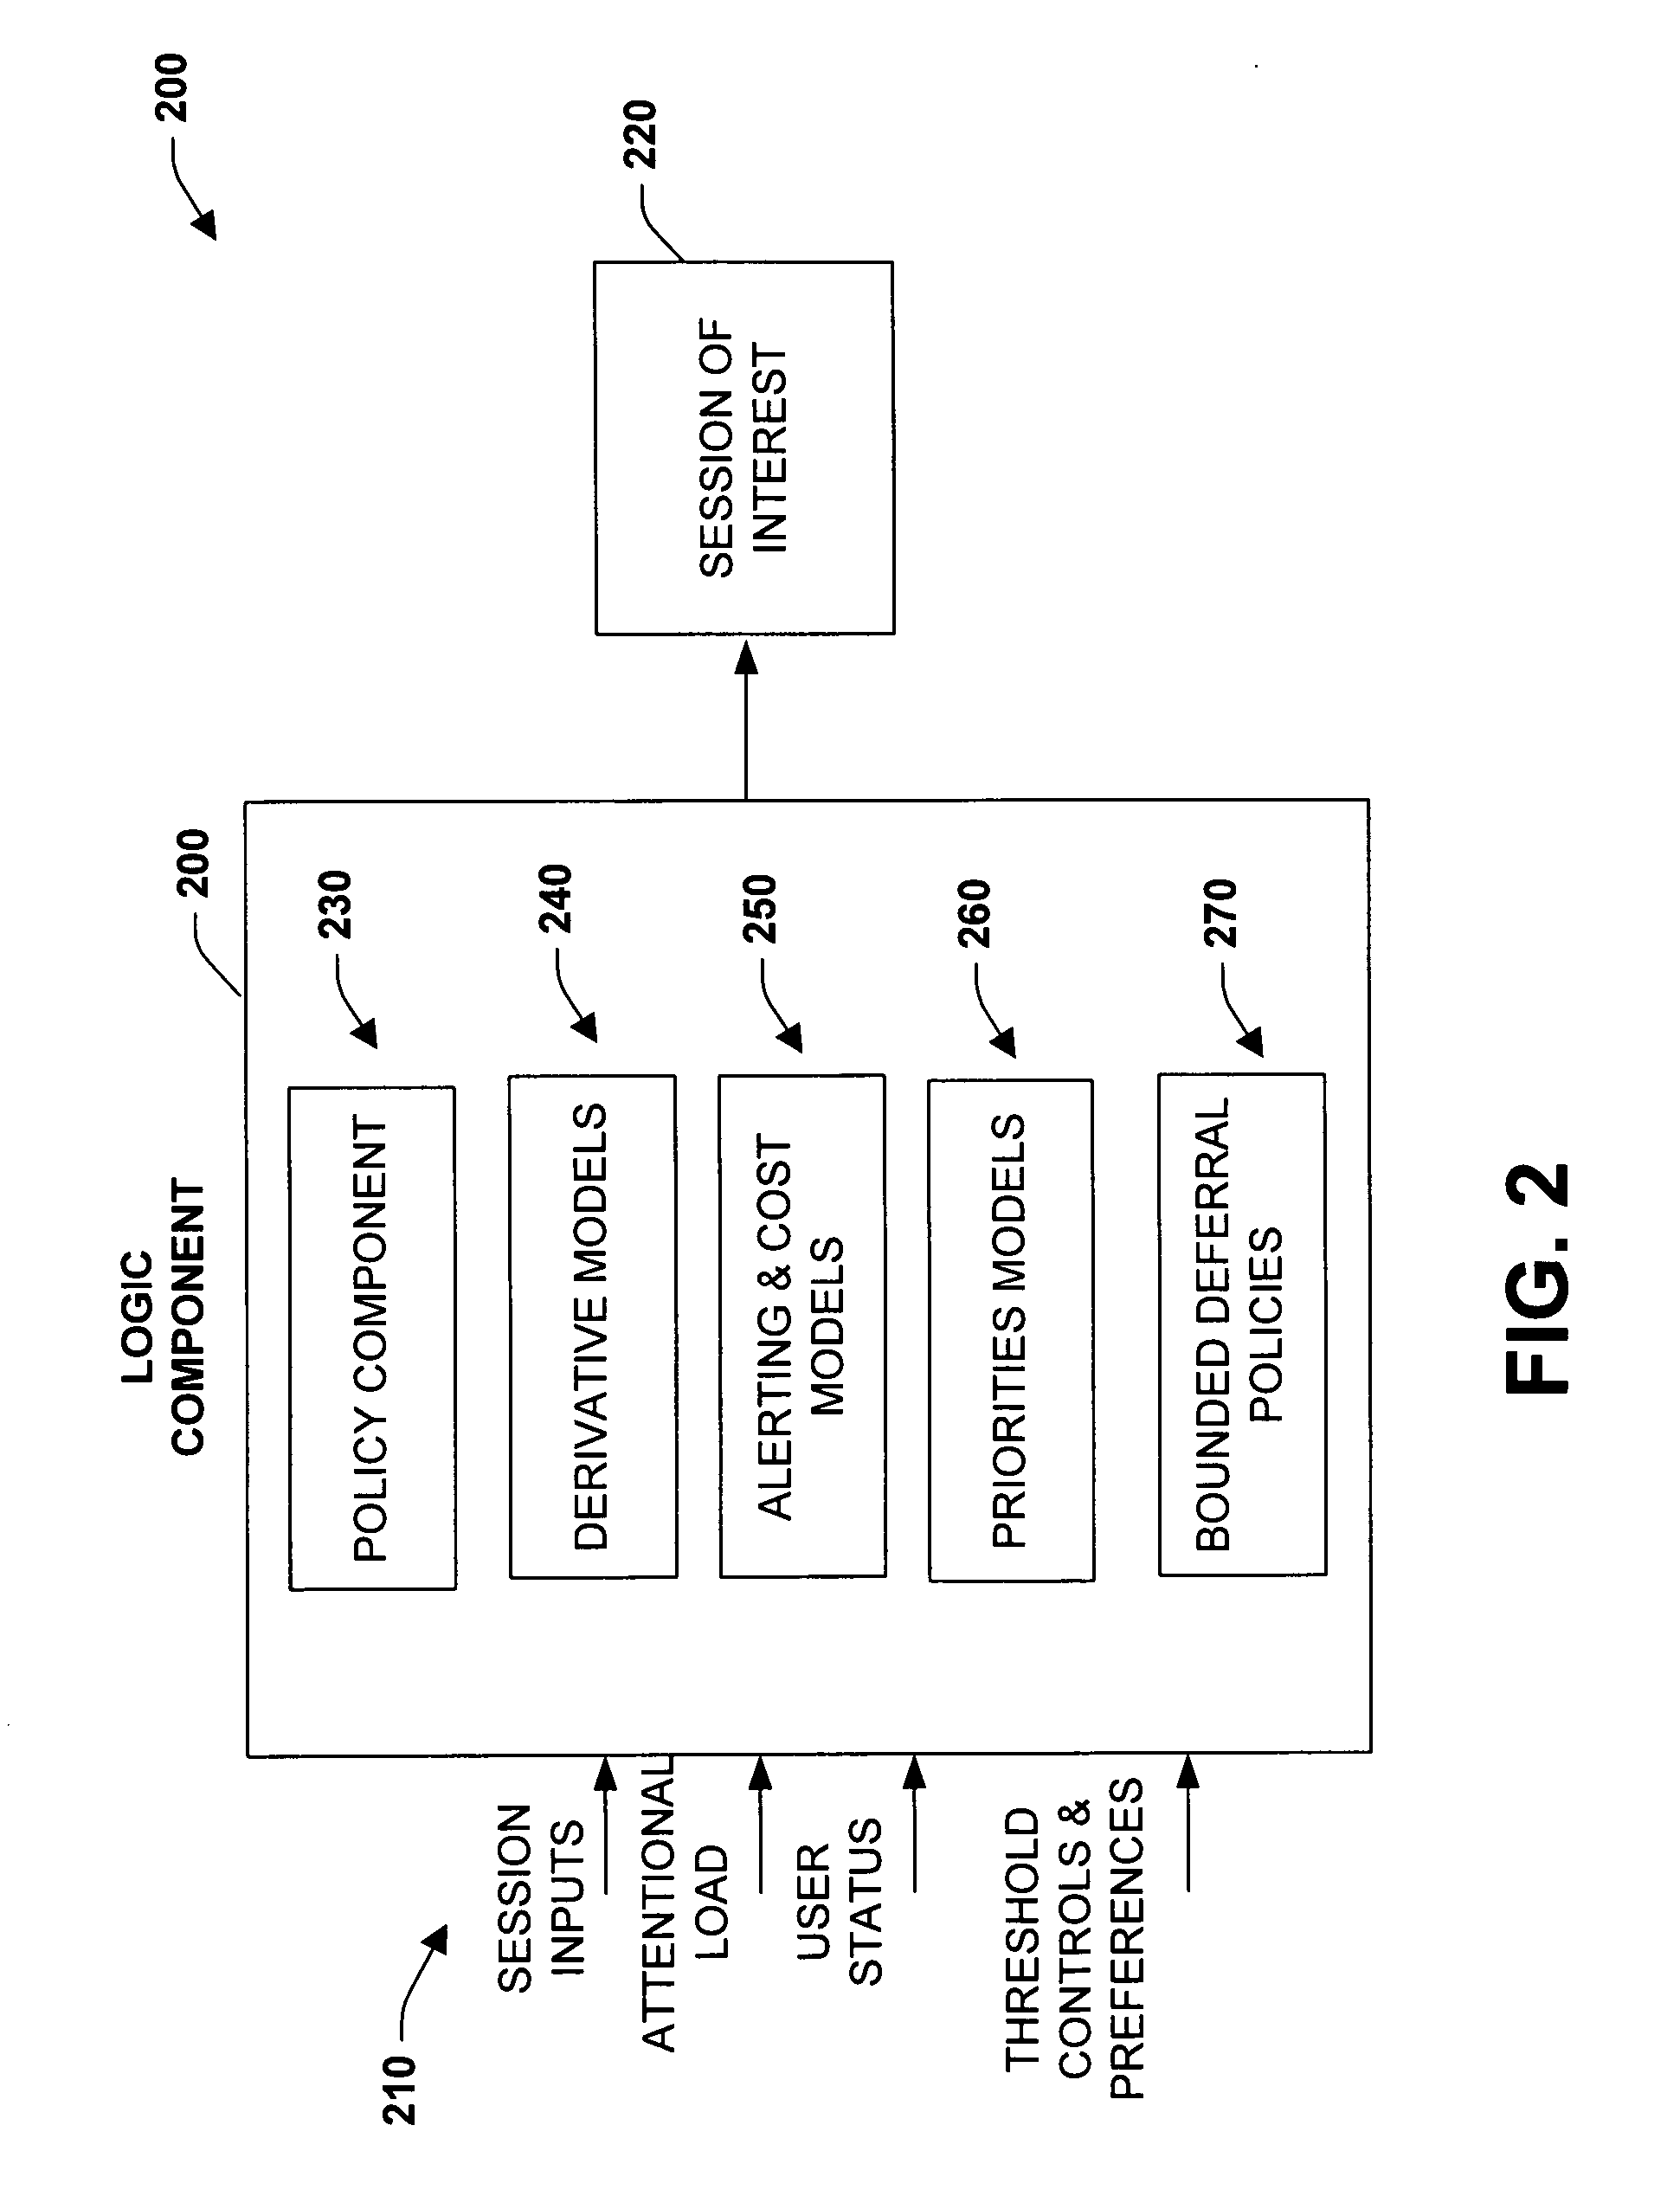 Systems and methods for triaging attention for providing awareness of communications session activity